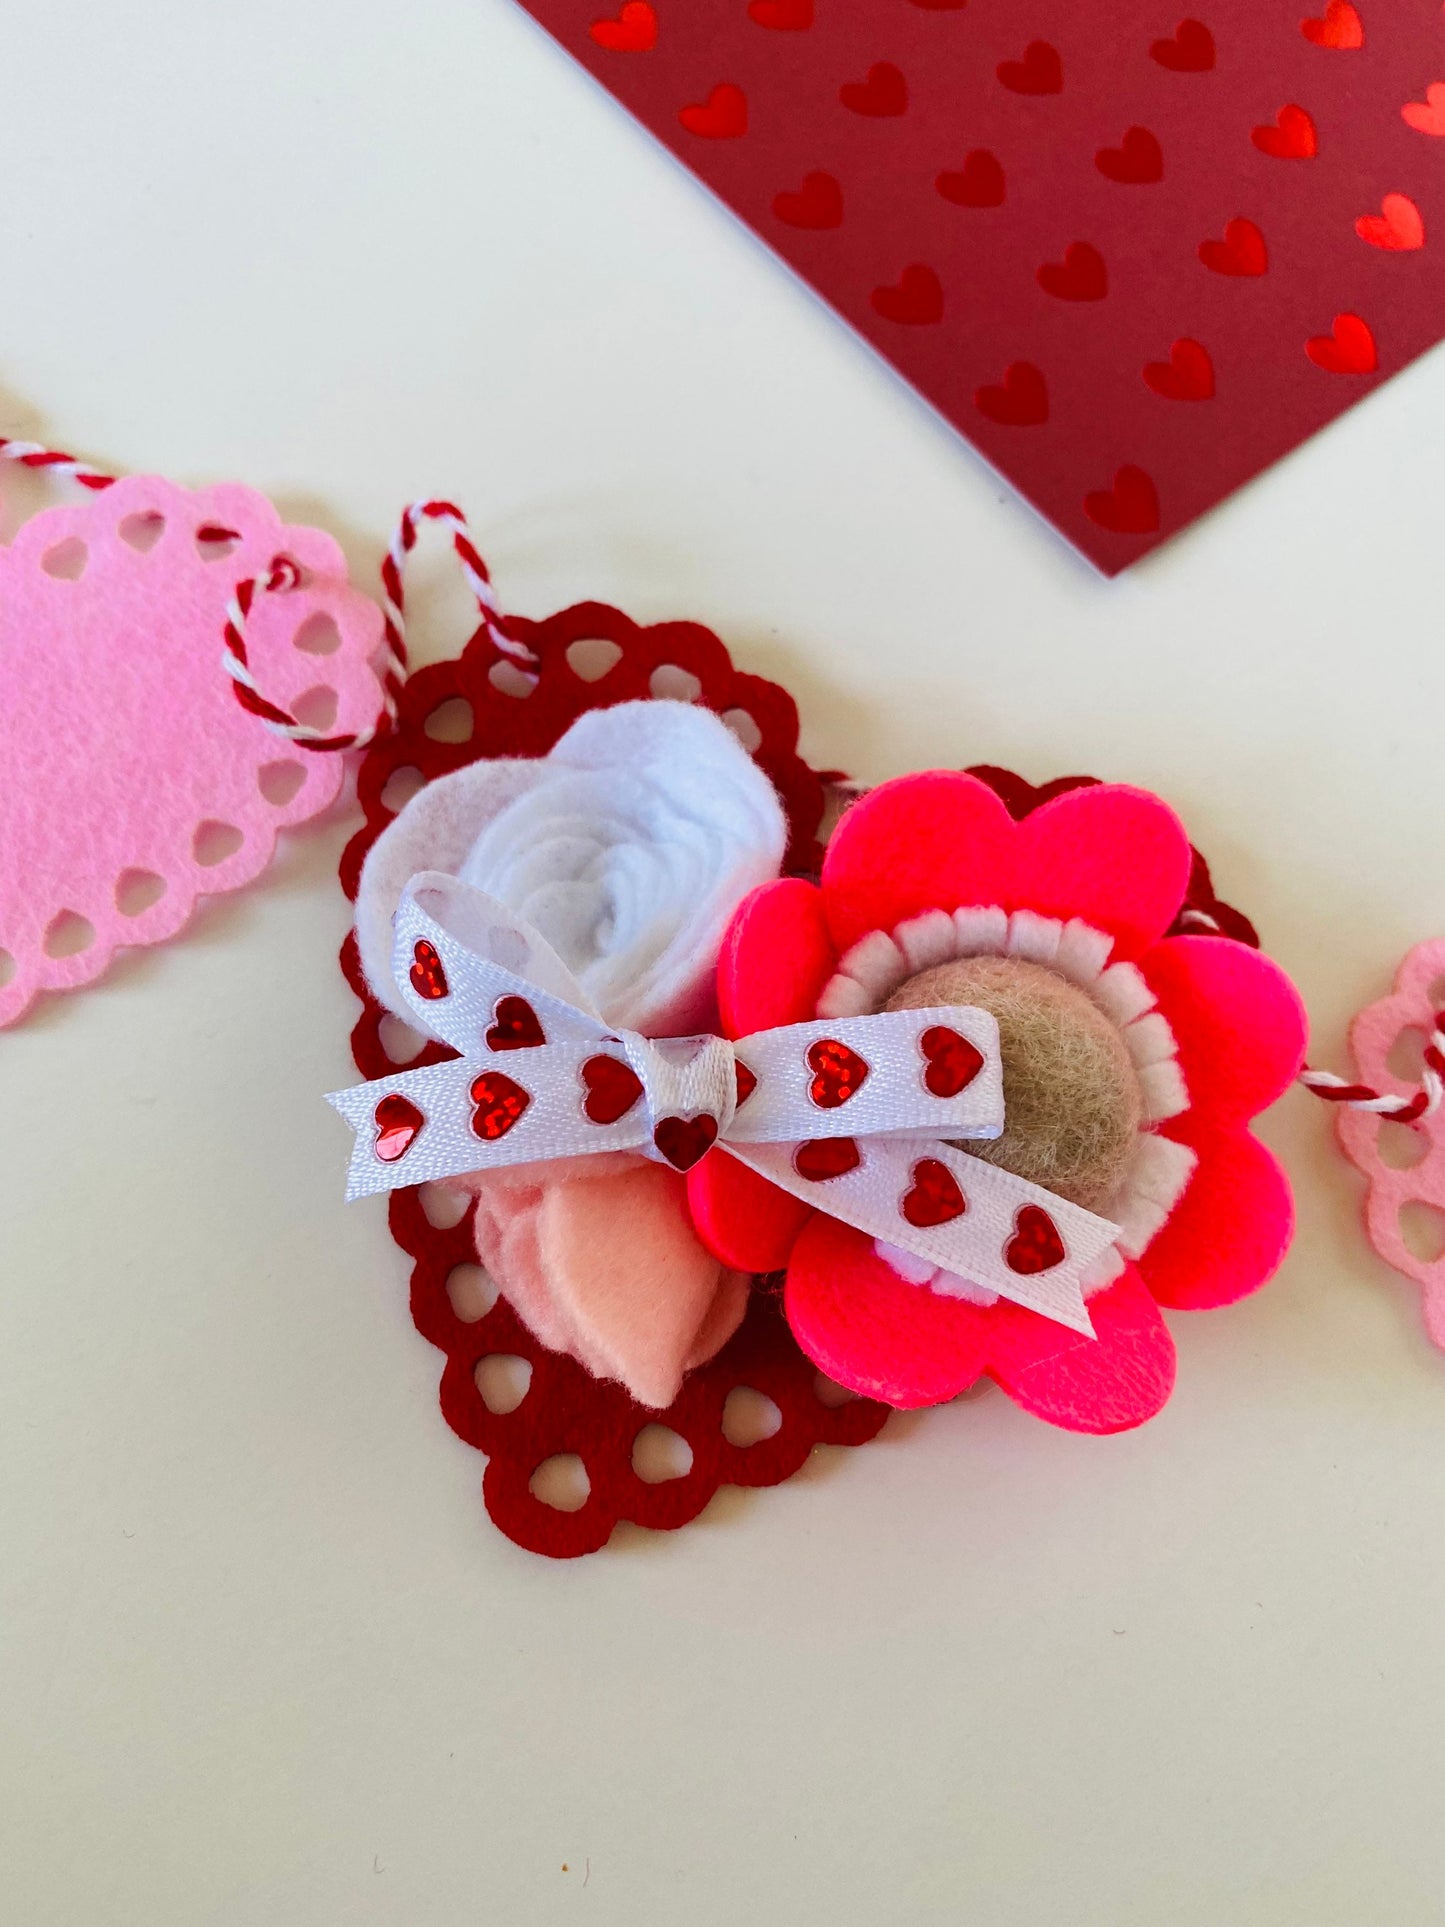 Felt Flowers and Roses Heart Doilies Garland Bunting Banner Valentines Day Wall Hanging Decoration